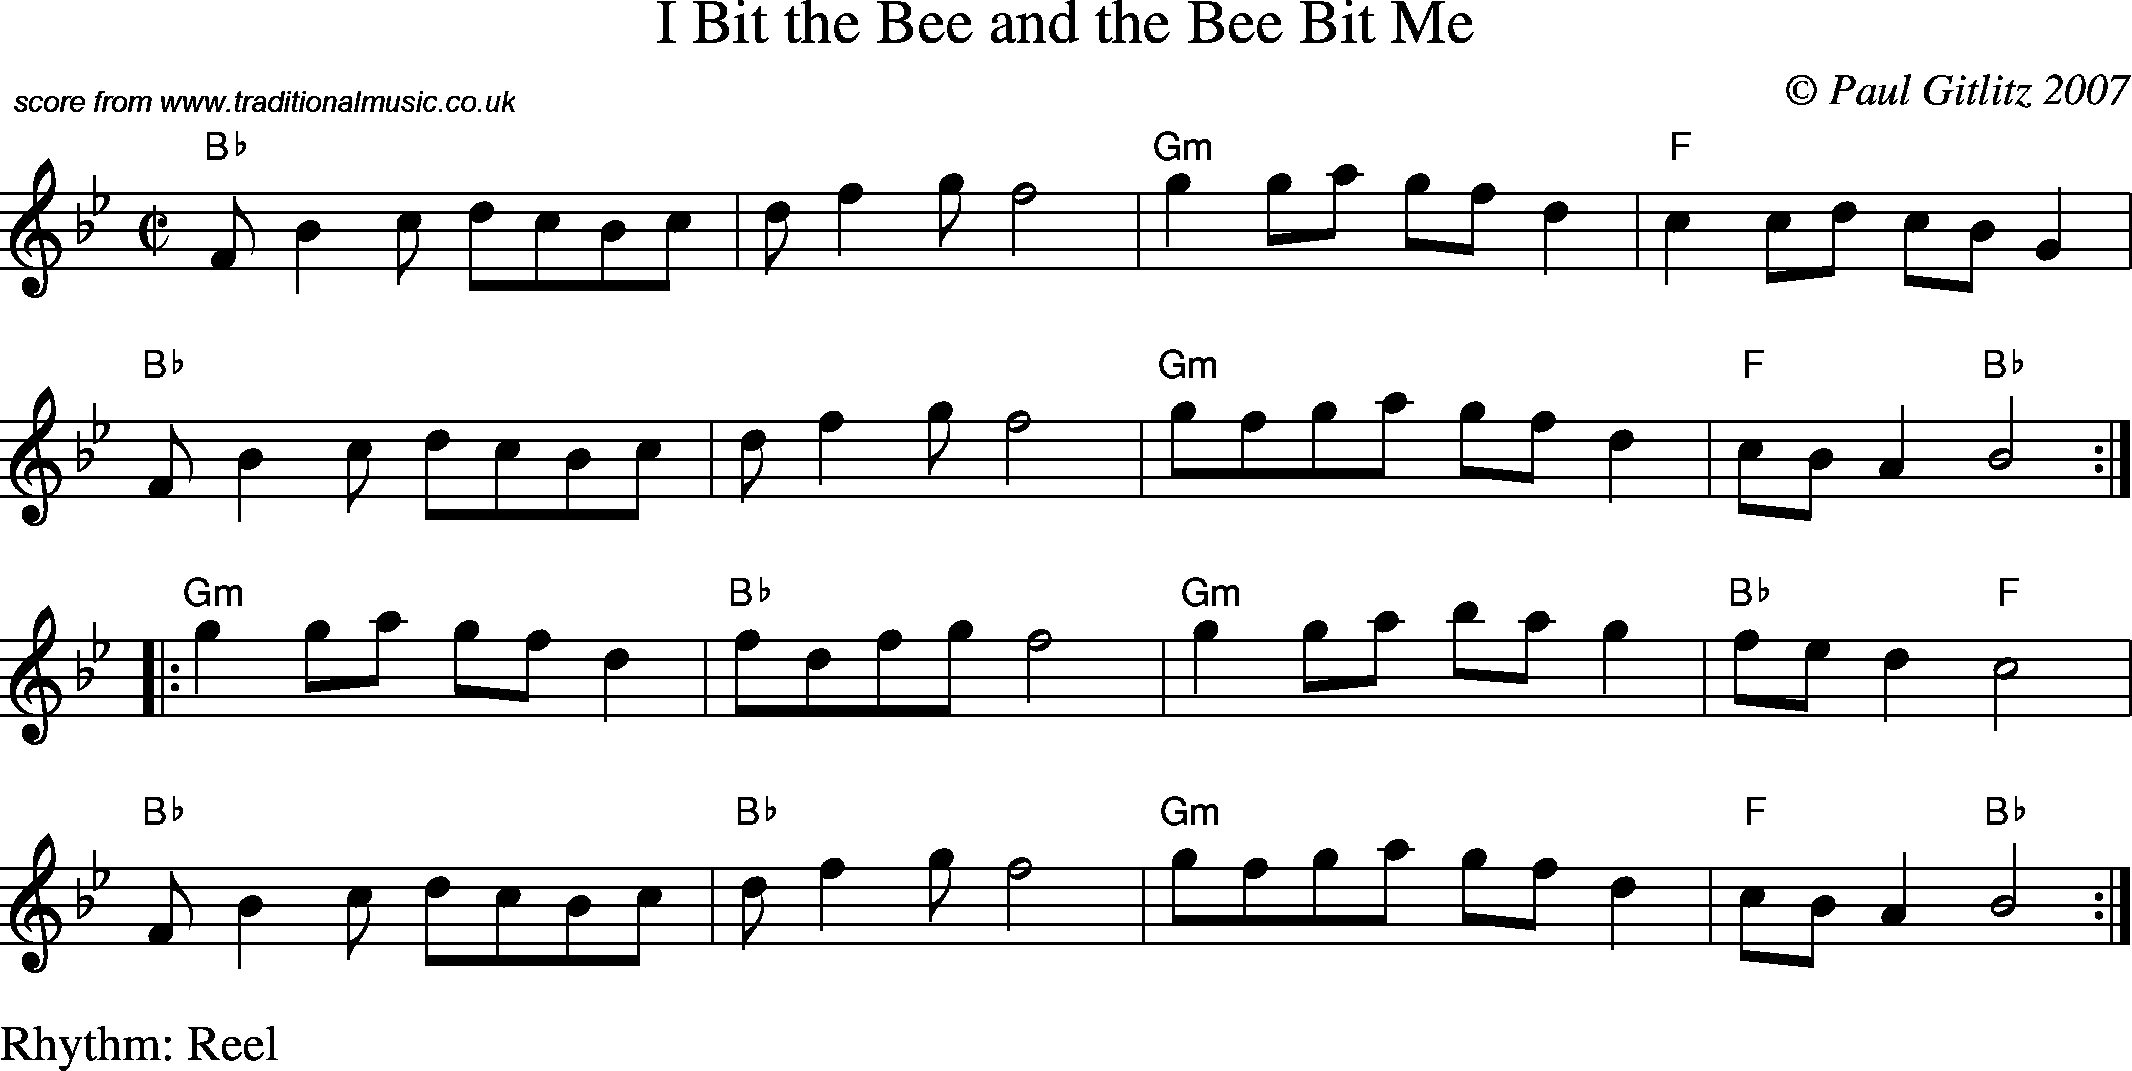 Sheet Music Score for Reel - I Bit the Bee and the Bee Bit Me